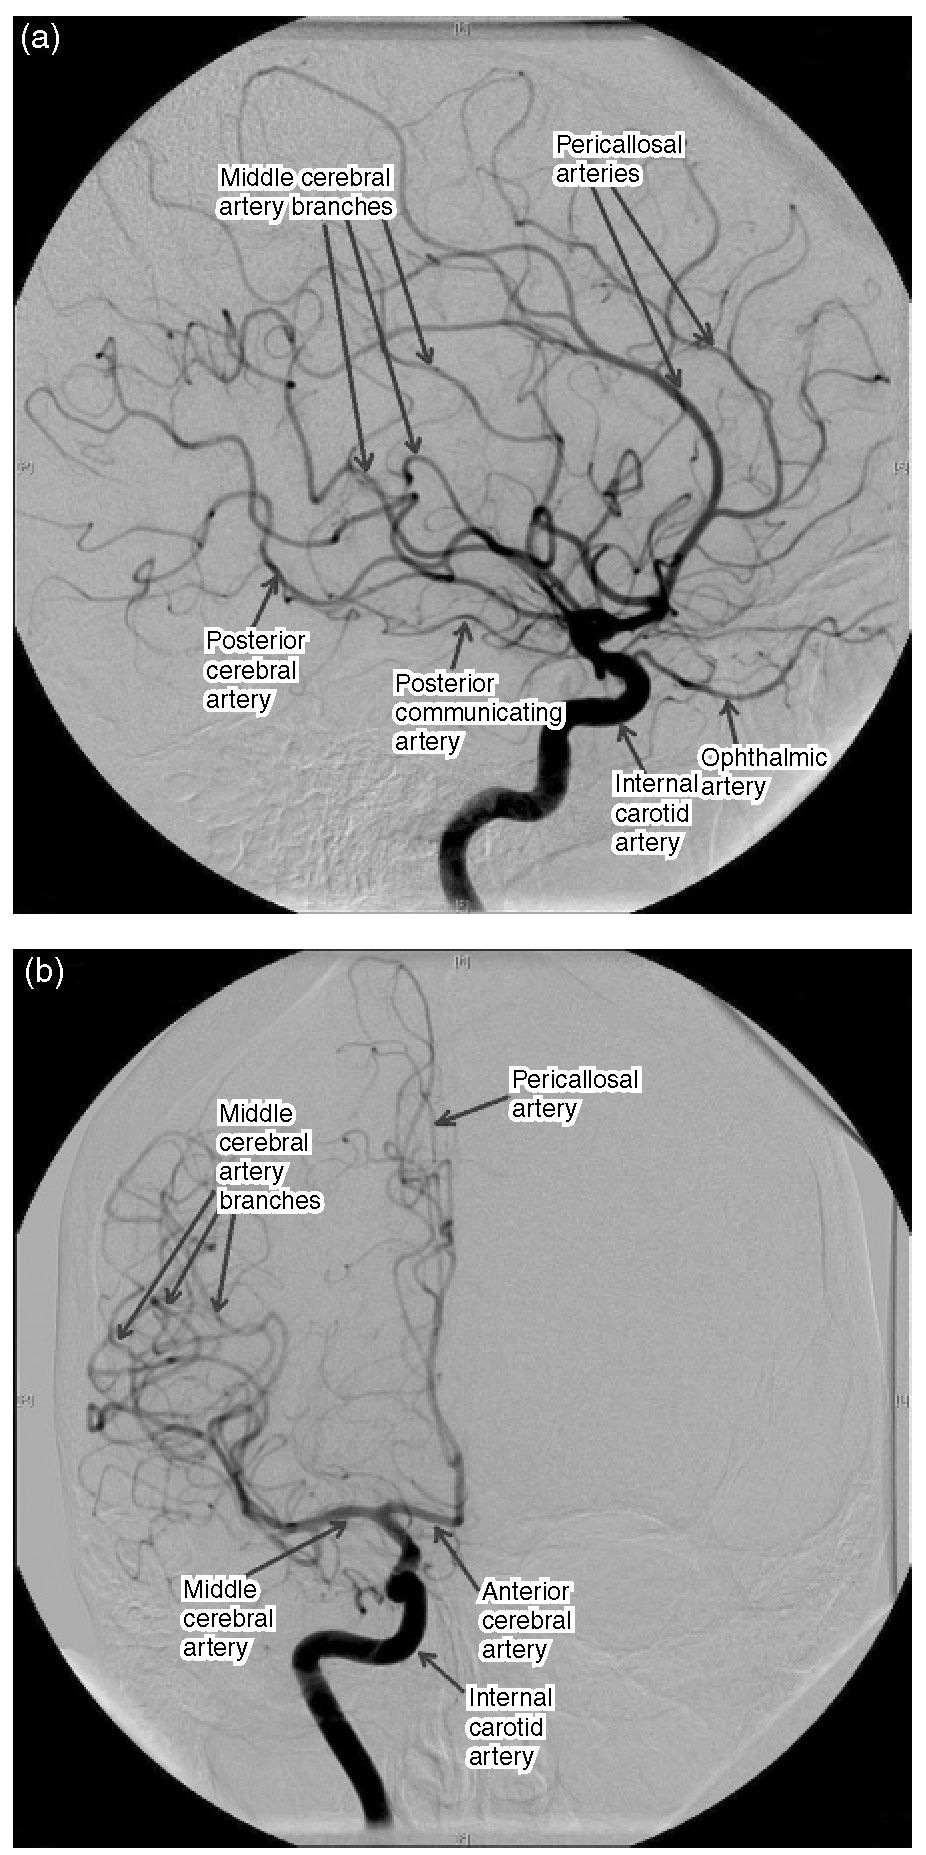 Subtraction angiogram ofthe internal carotid circulation. (a) Lateral projection; (b) anteroposterior projection.  